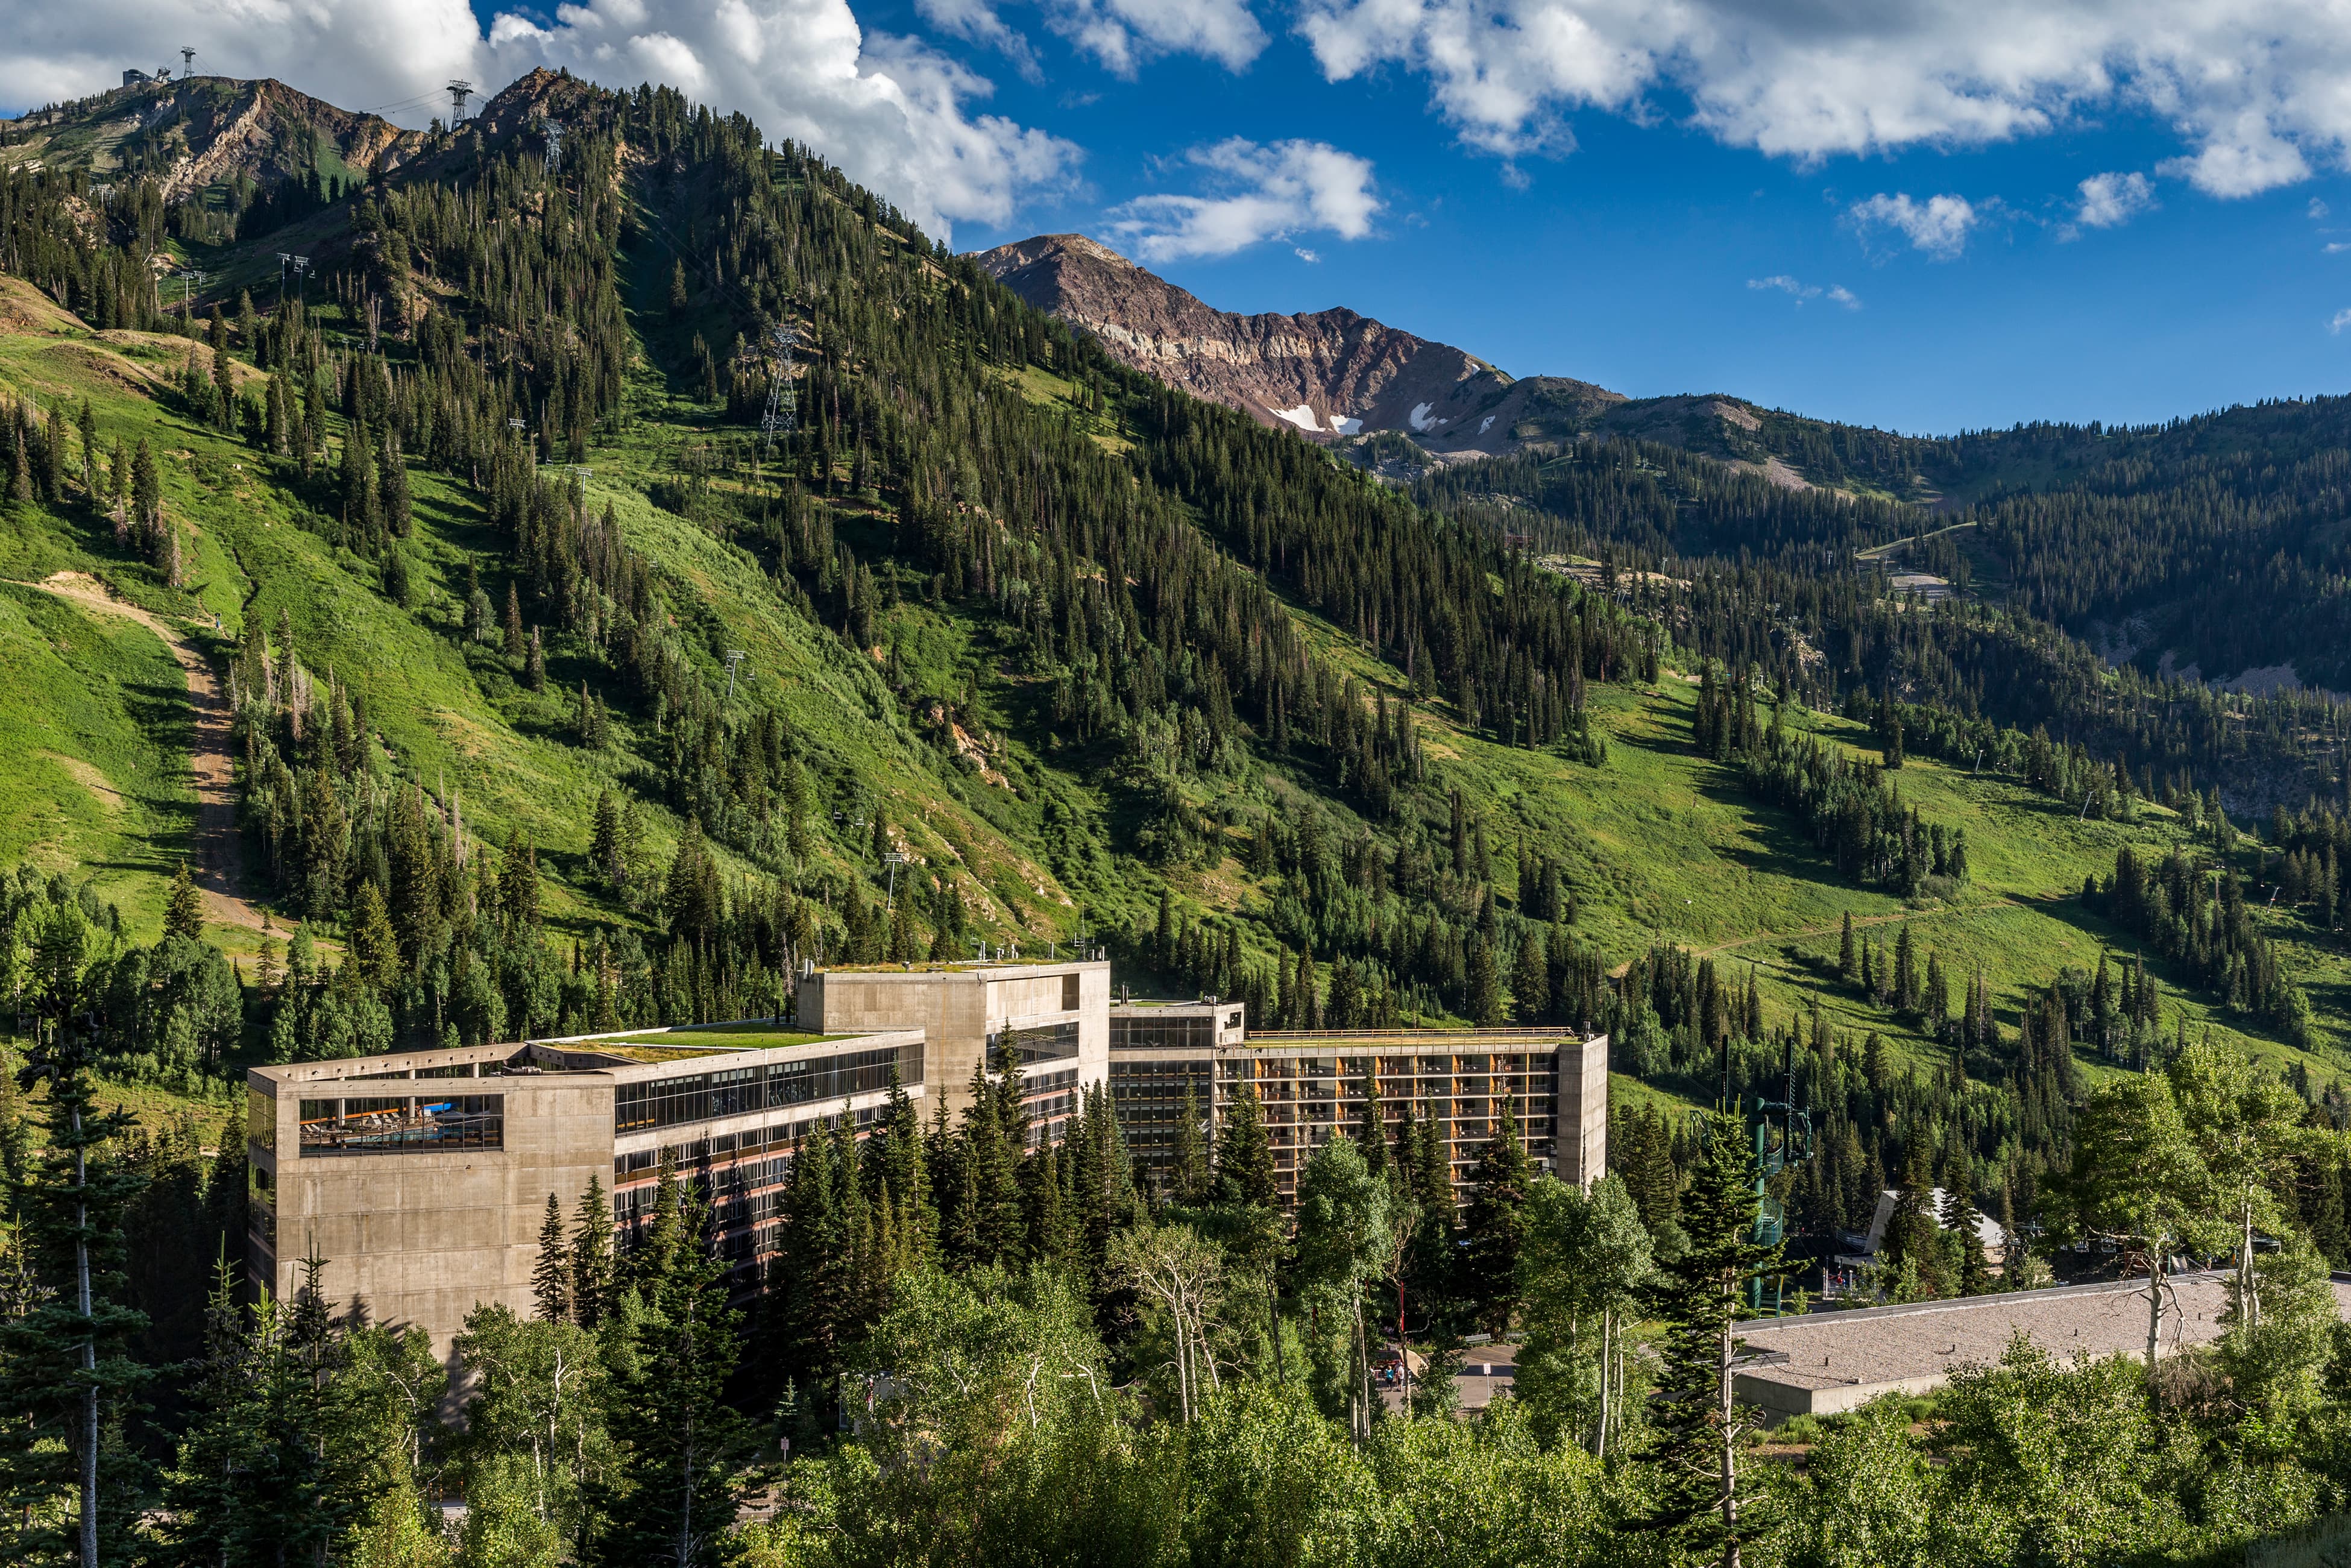 Snowbird restaurants with amazing views and restaurants with private rooms utah